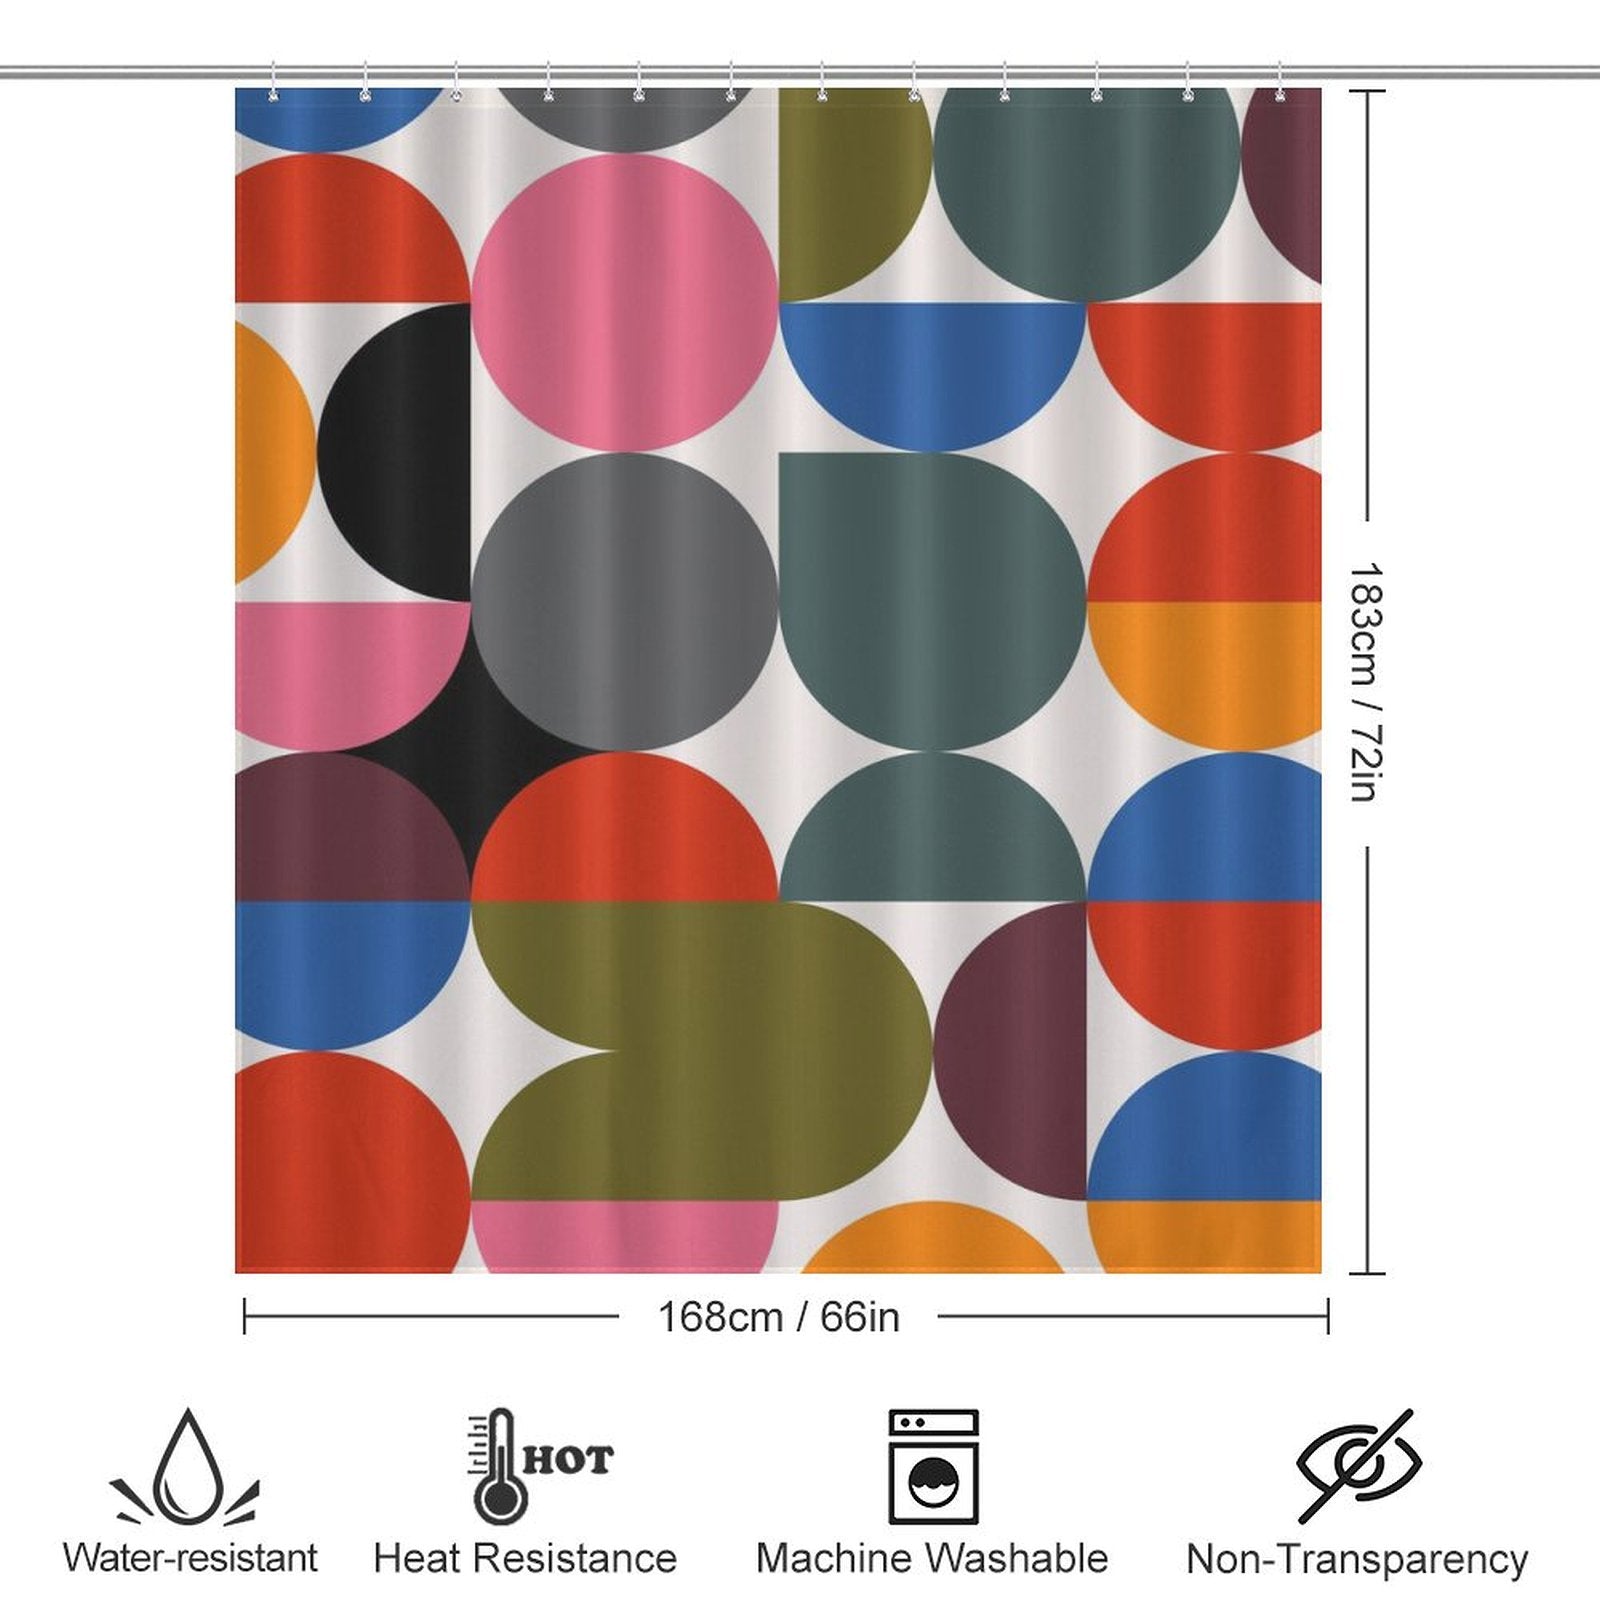 The product is a shower curtain with a colorful geometric pattern reminiscent of abstract modern art. Dimensions are 183 cm by 168 cm. Labeled as waterproof, mildew-resistant, heat resistant, machine washable, and non-transparent.
Product Name: Abstract Modern Art Rainbow Polka Dot Geometric Shower Curtain-Cottoncat
Brand Name: Cotton Cat